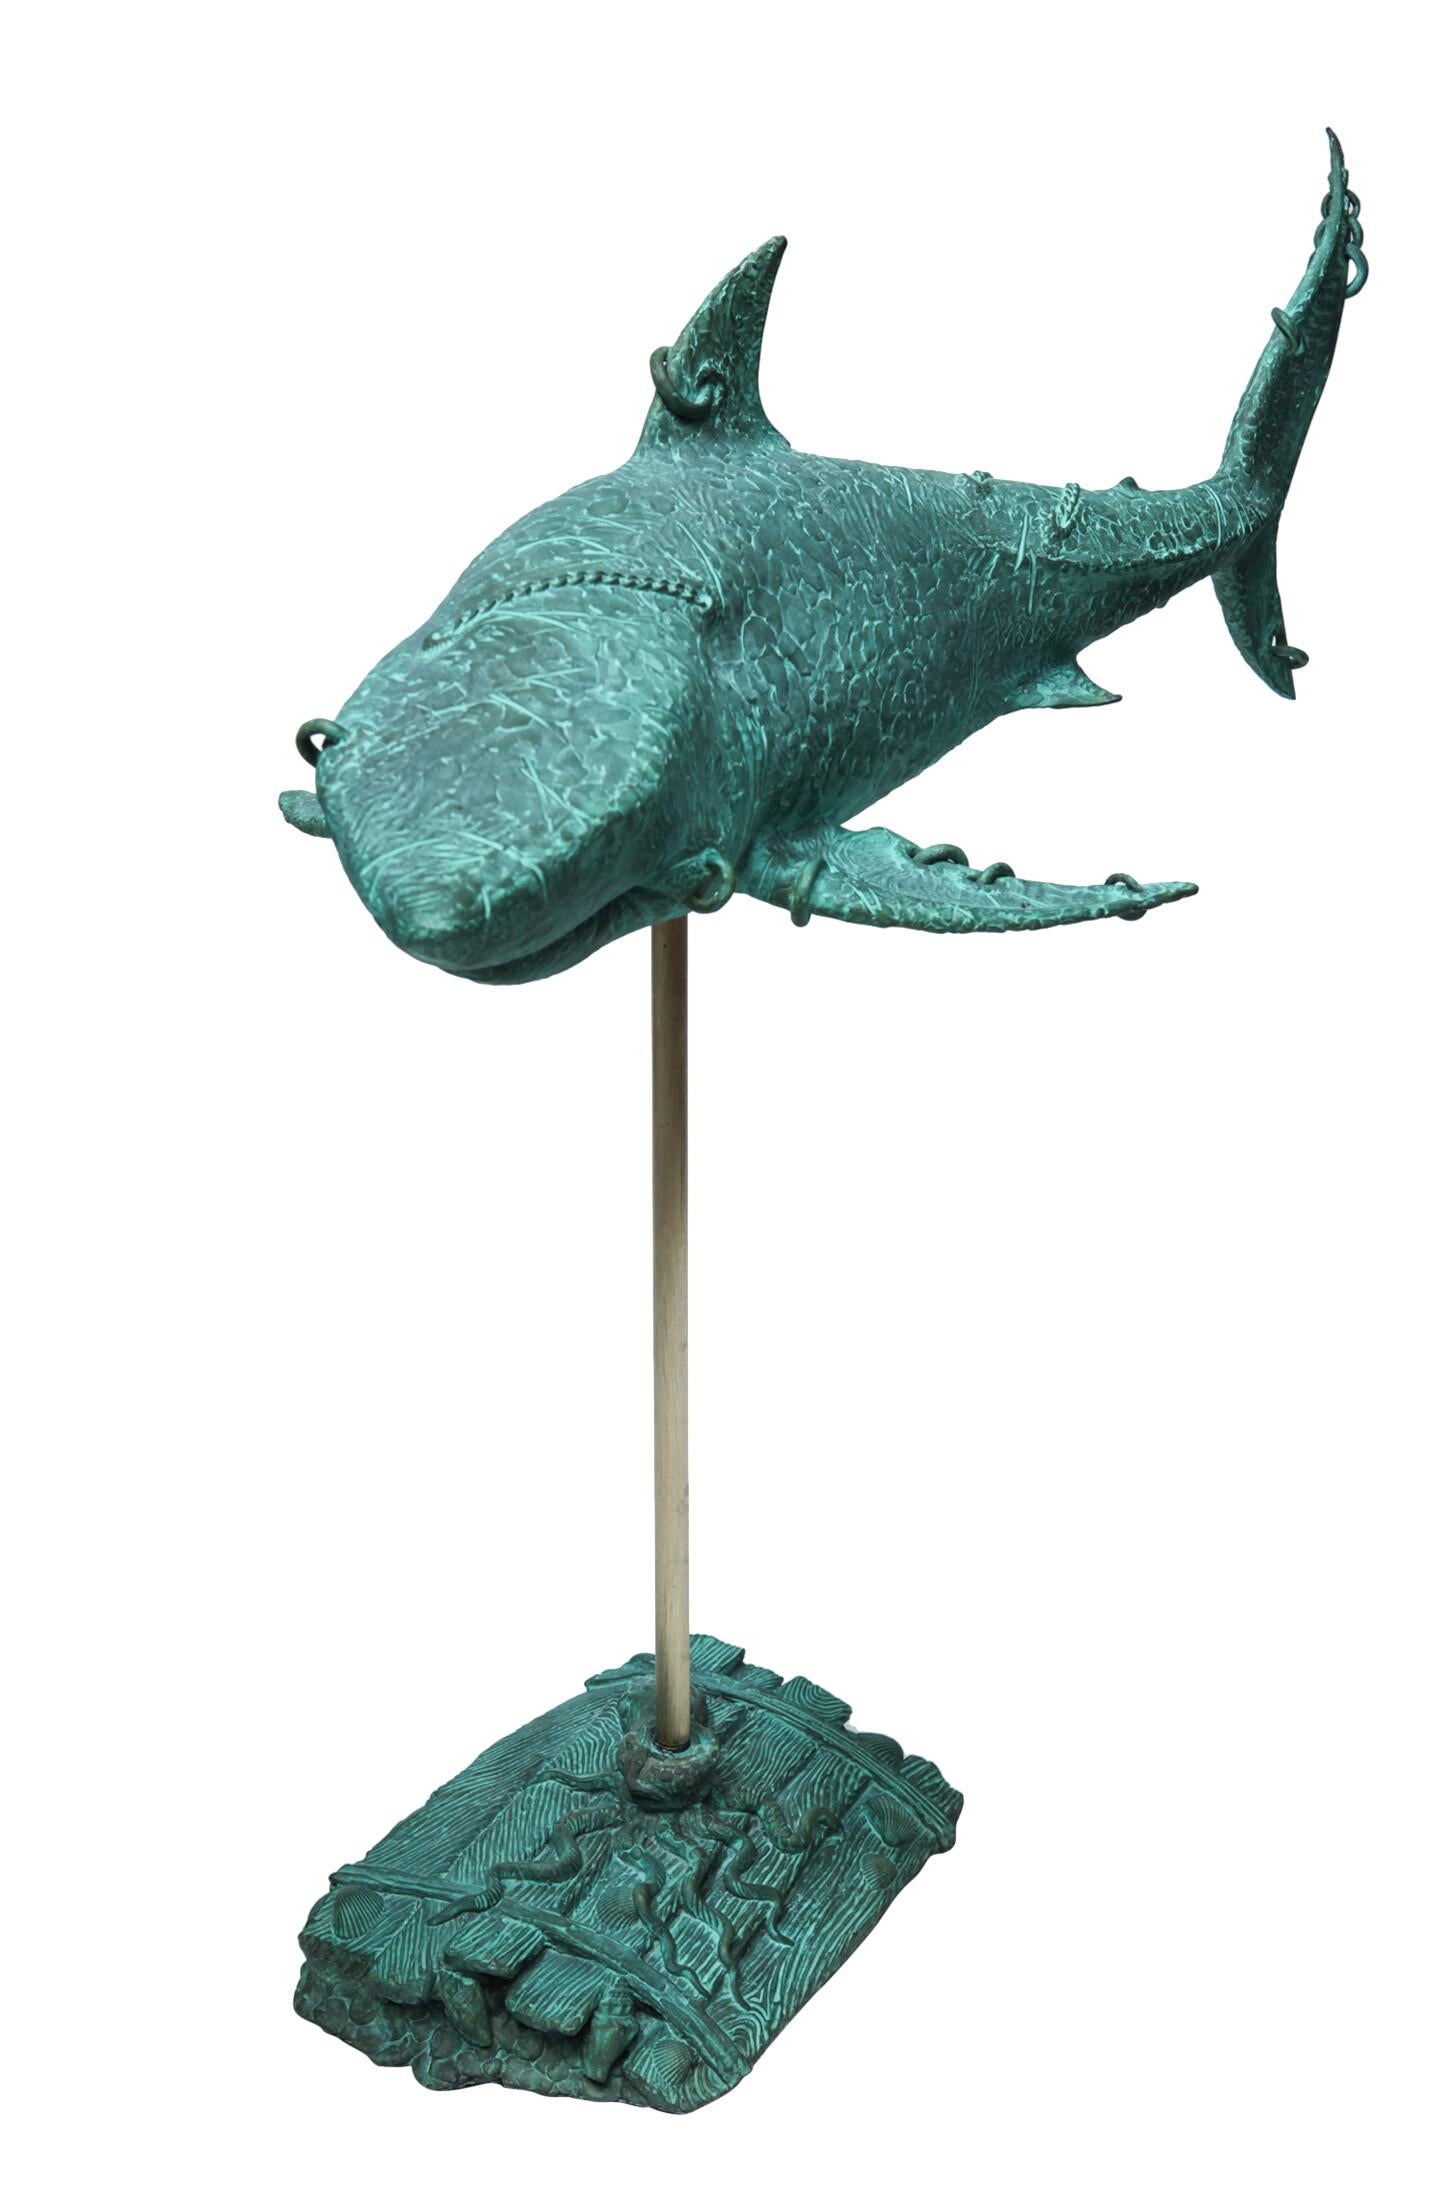 Volodymyr Mykytenko - Shark (2014)

Shark - the beauty and strength of this creation of the seas anticipates and fascinates everyone. I see in him a keeper of treasures and one who has seen many adventures.

Additional information:
Medium: Bronze,